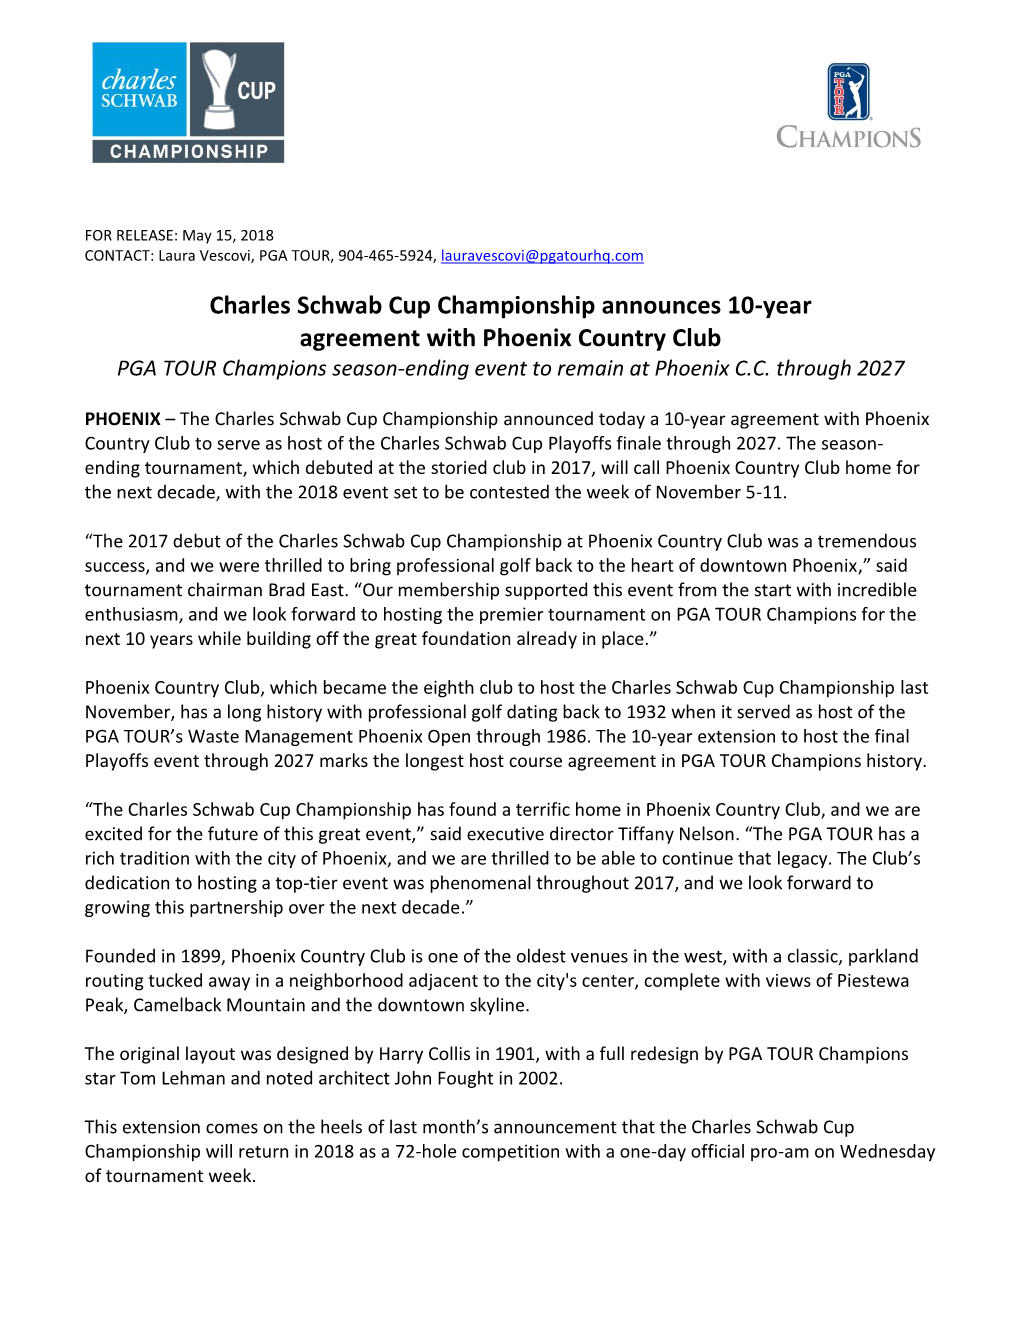 Charles Schwab Cup Championship Announces 10-Year Agreement with Phoenix Country Club PGA TOUR Champions Season-Ending Event to Remain at Phoenix C.C